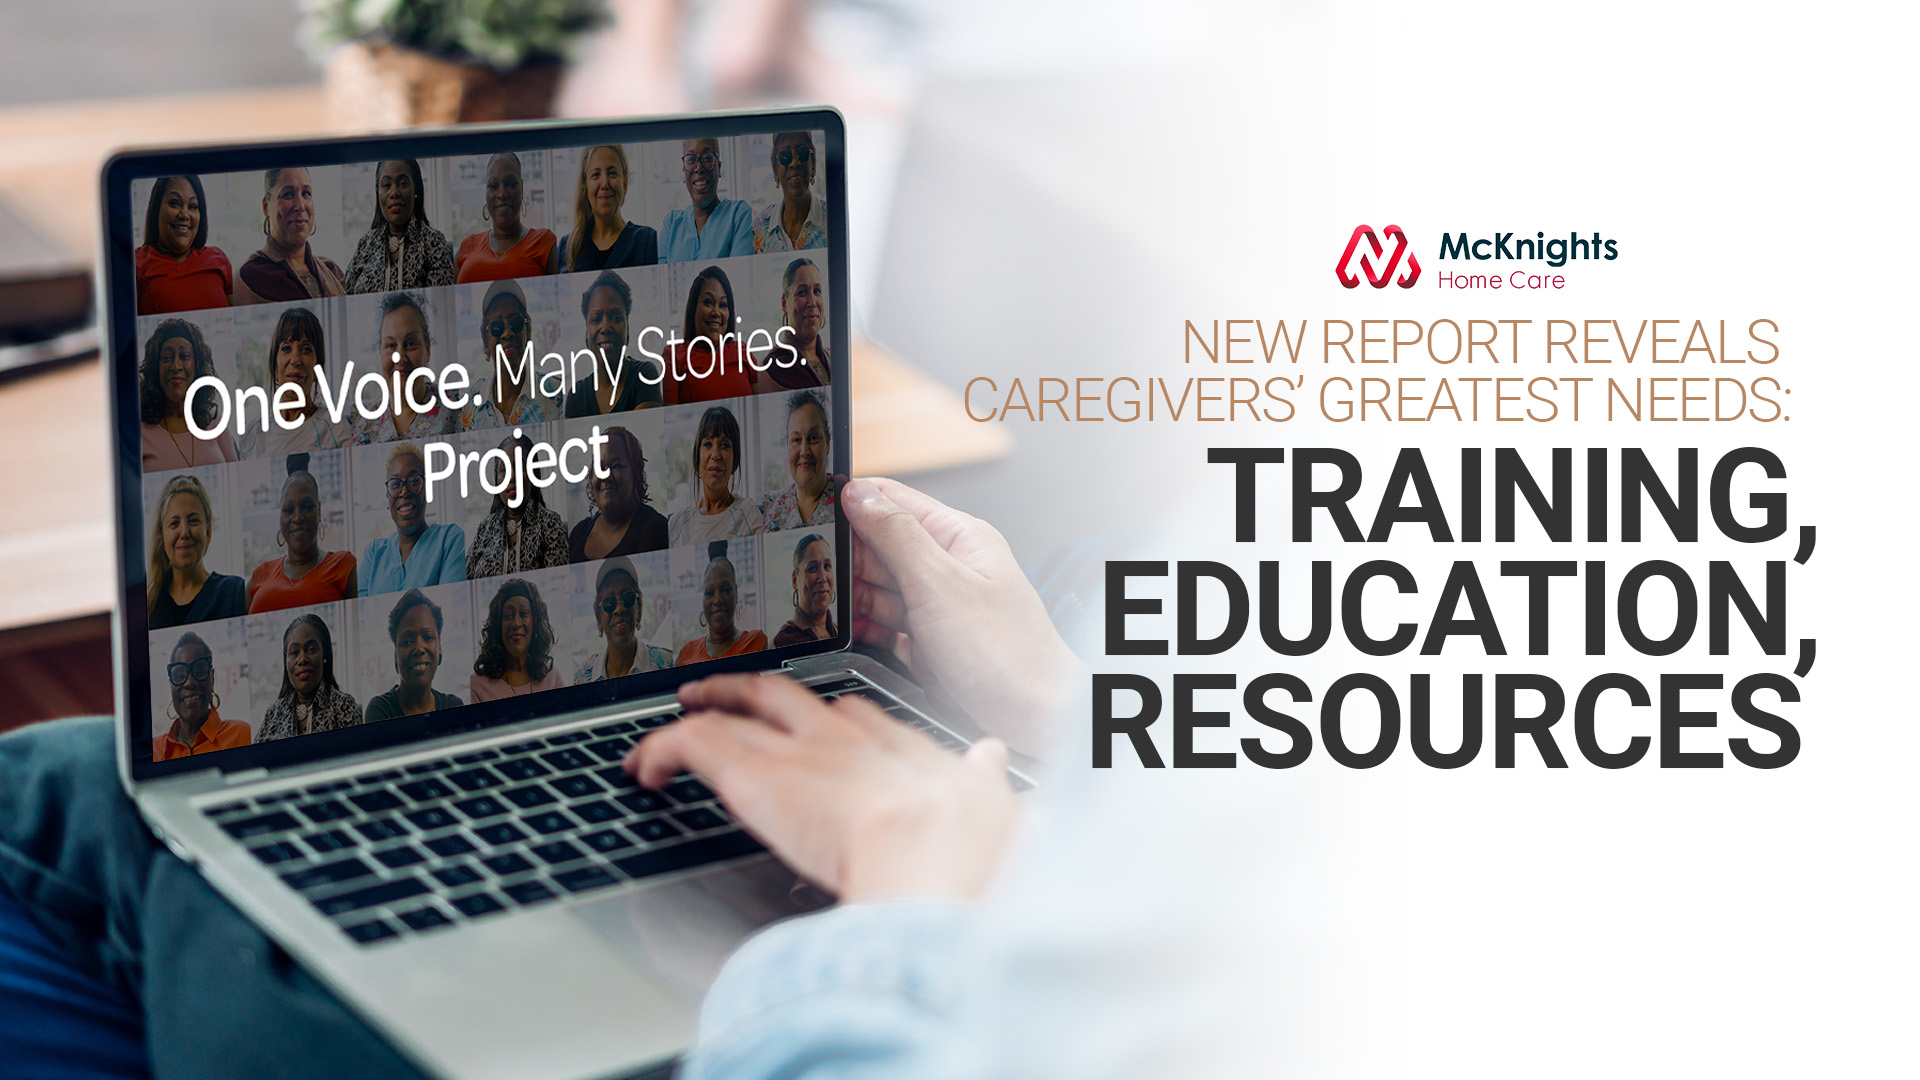 New report reveals caregivers’ greatest needs: Training, education, resources